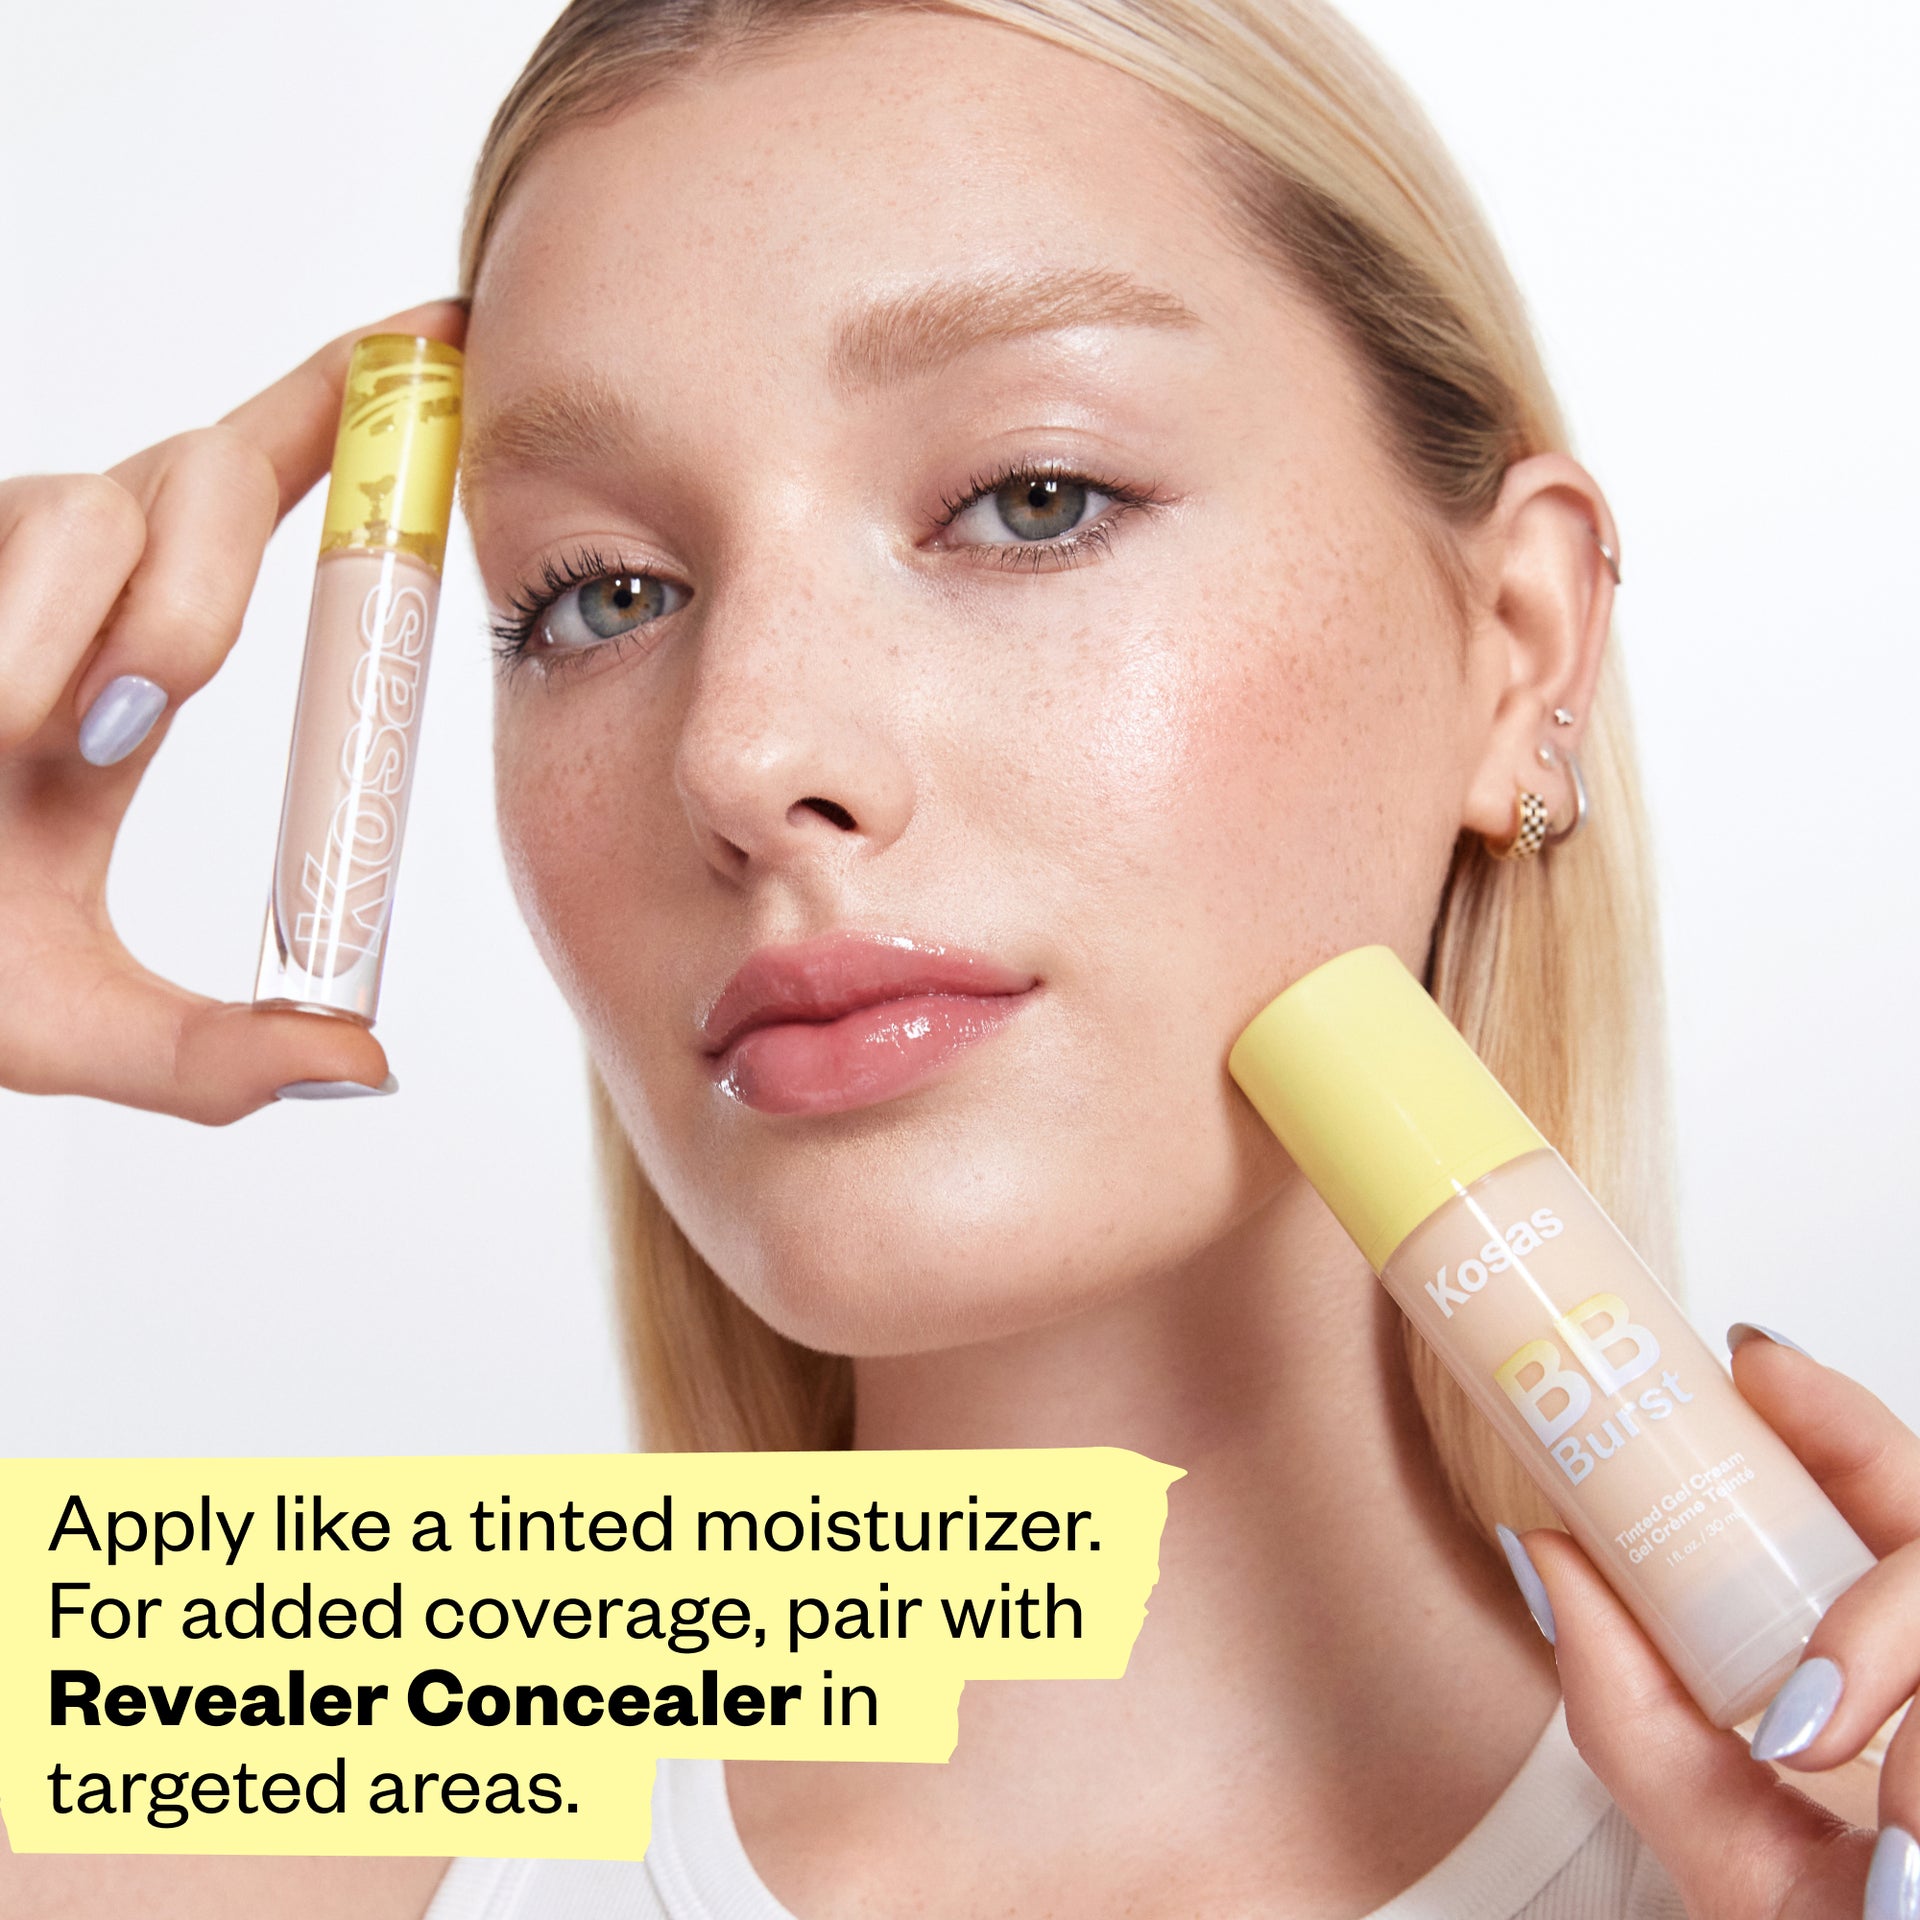 Apply like a tinted moisturizer. For added coverage, pair with revealer concealer in targeted areas.